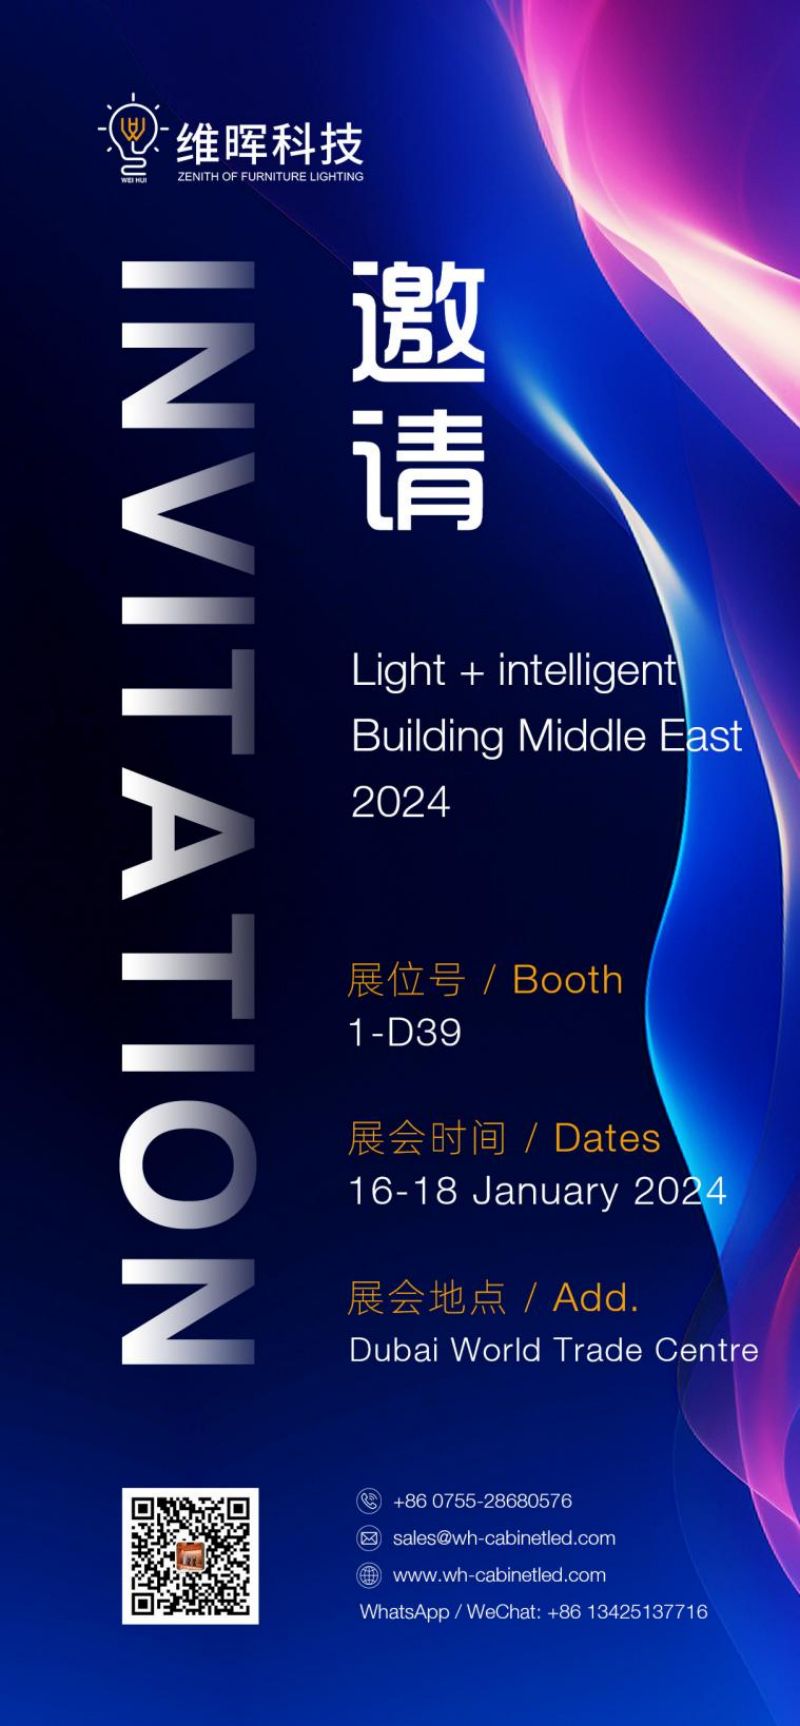 Light + intelligent Building Middle East 2024 is coming soon! Come to visit us at Weihui Technology Booth No. 1-D39!